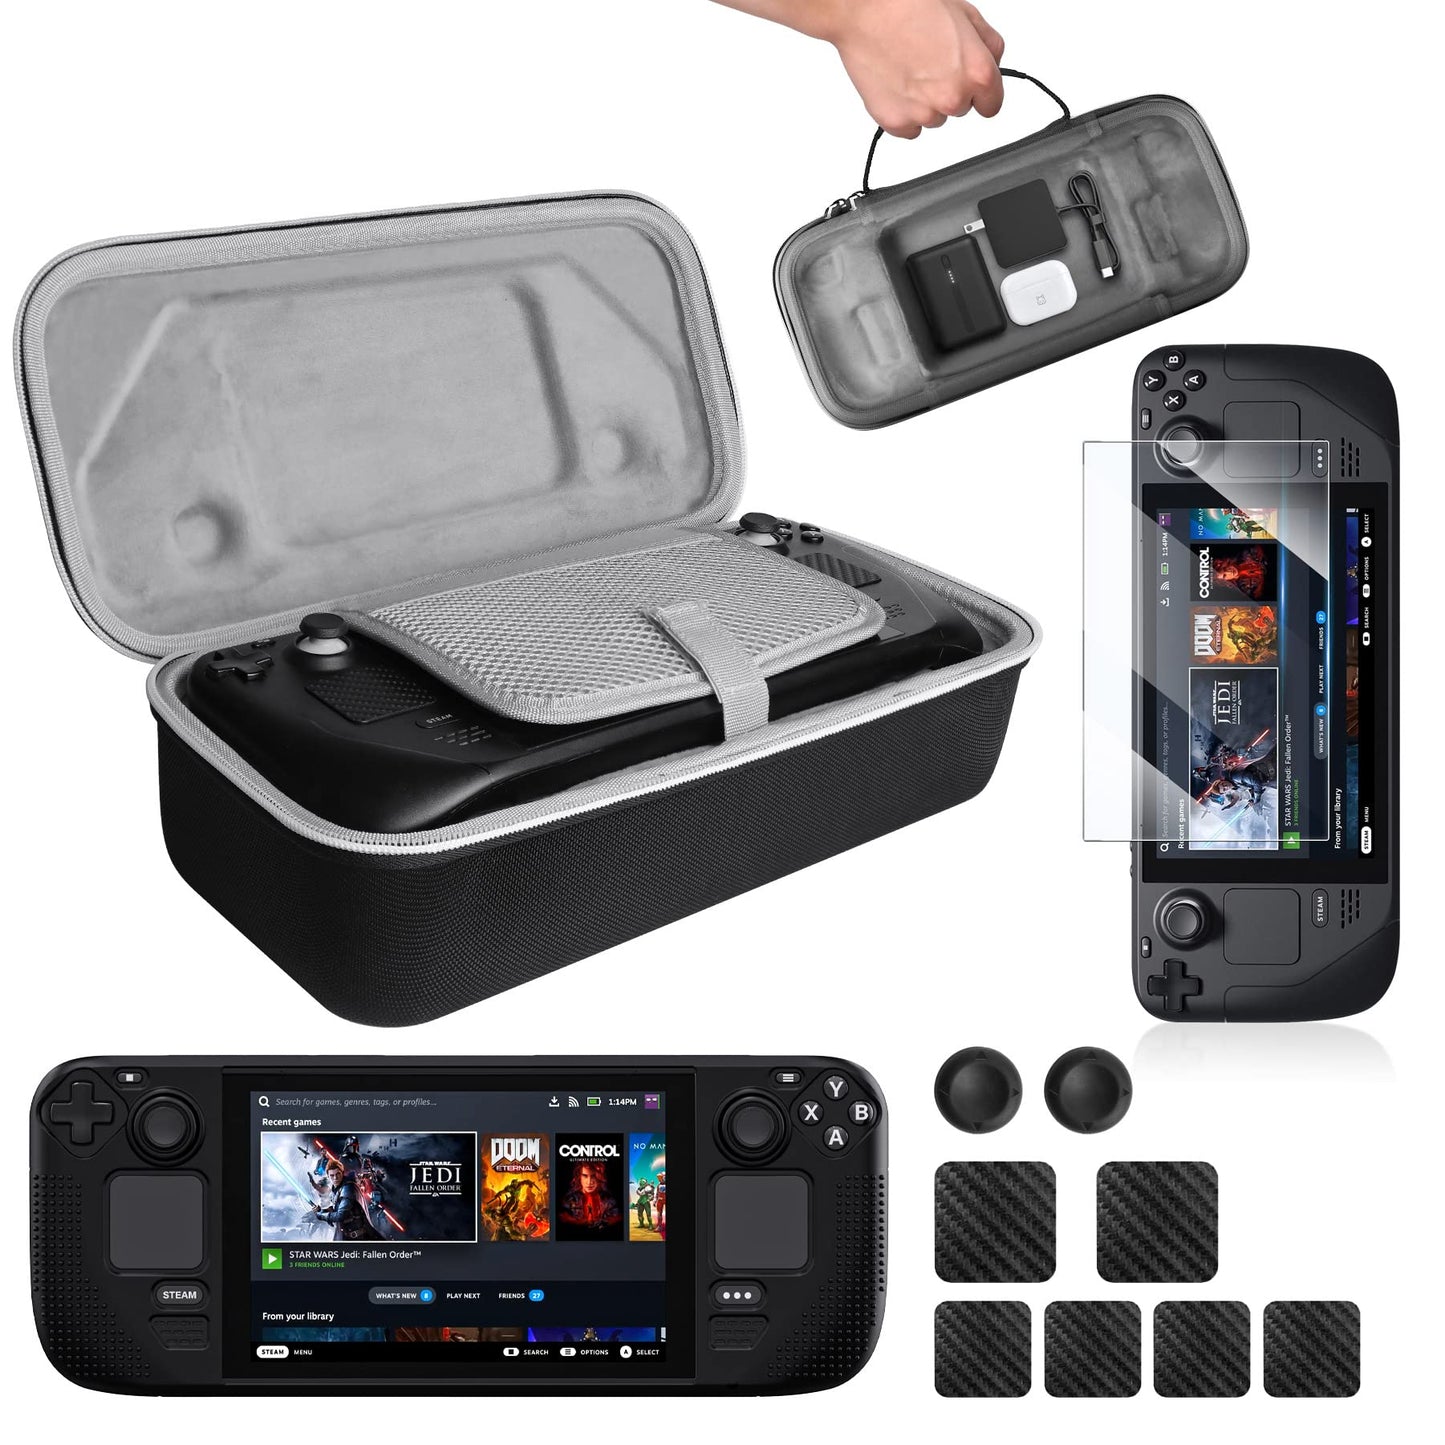 [5 in 1] Accessories Kit with Hard Shell Travel Carry Case for Steam Deck BE101